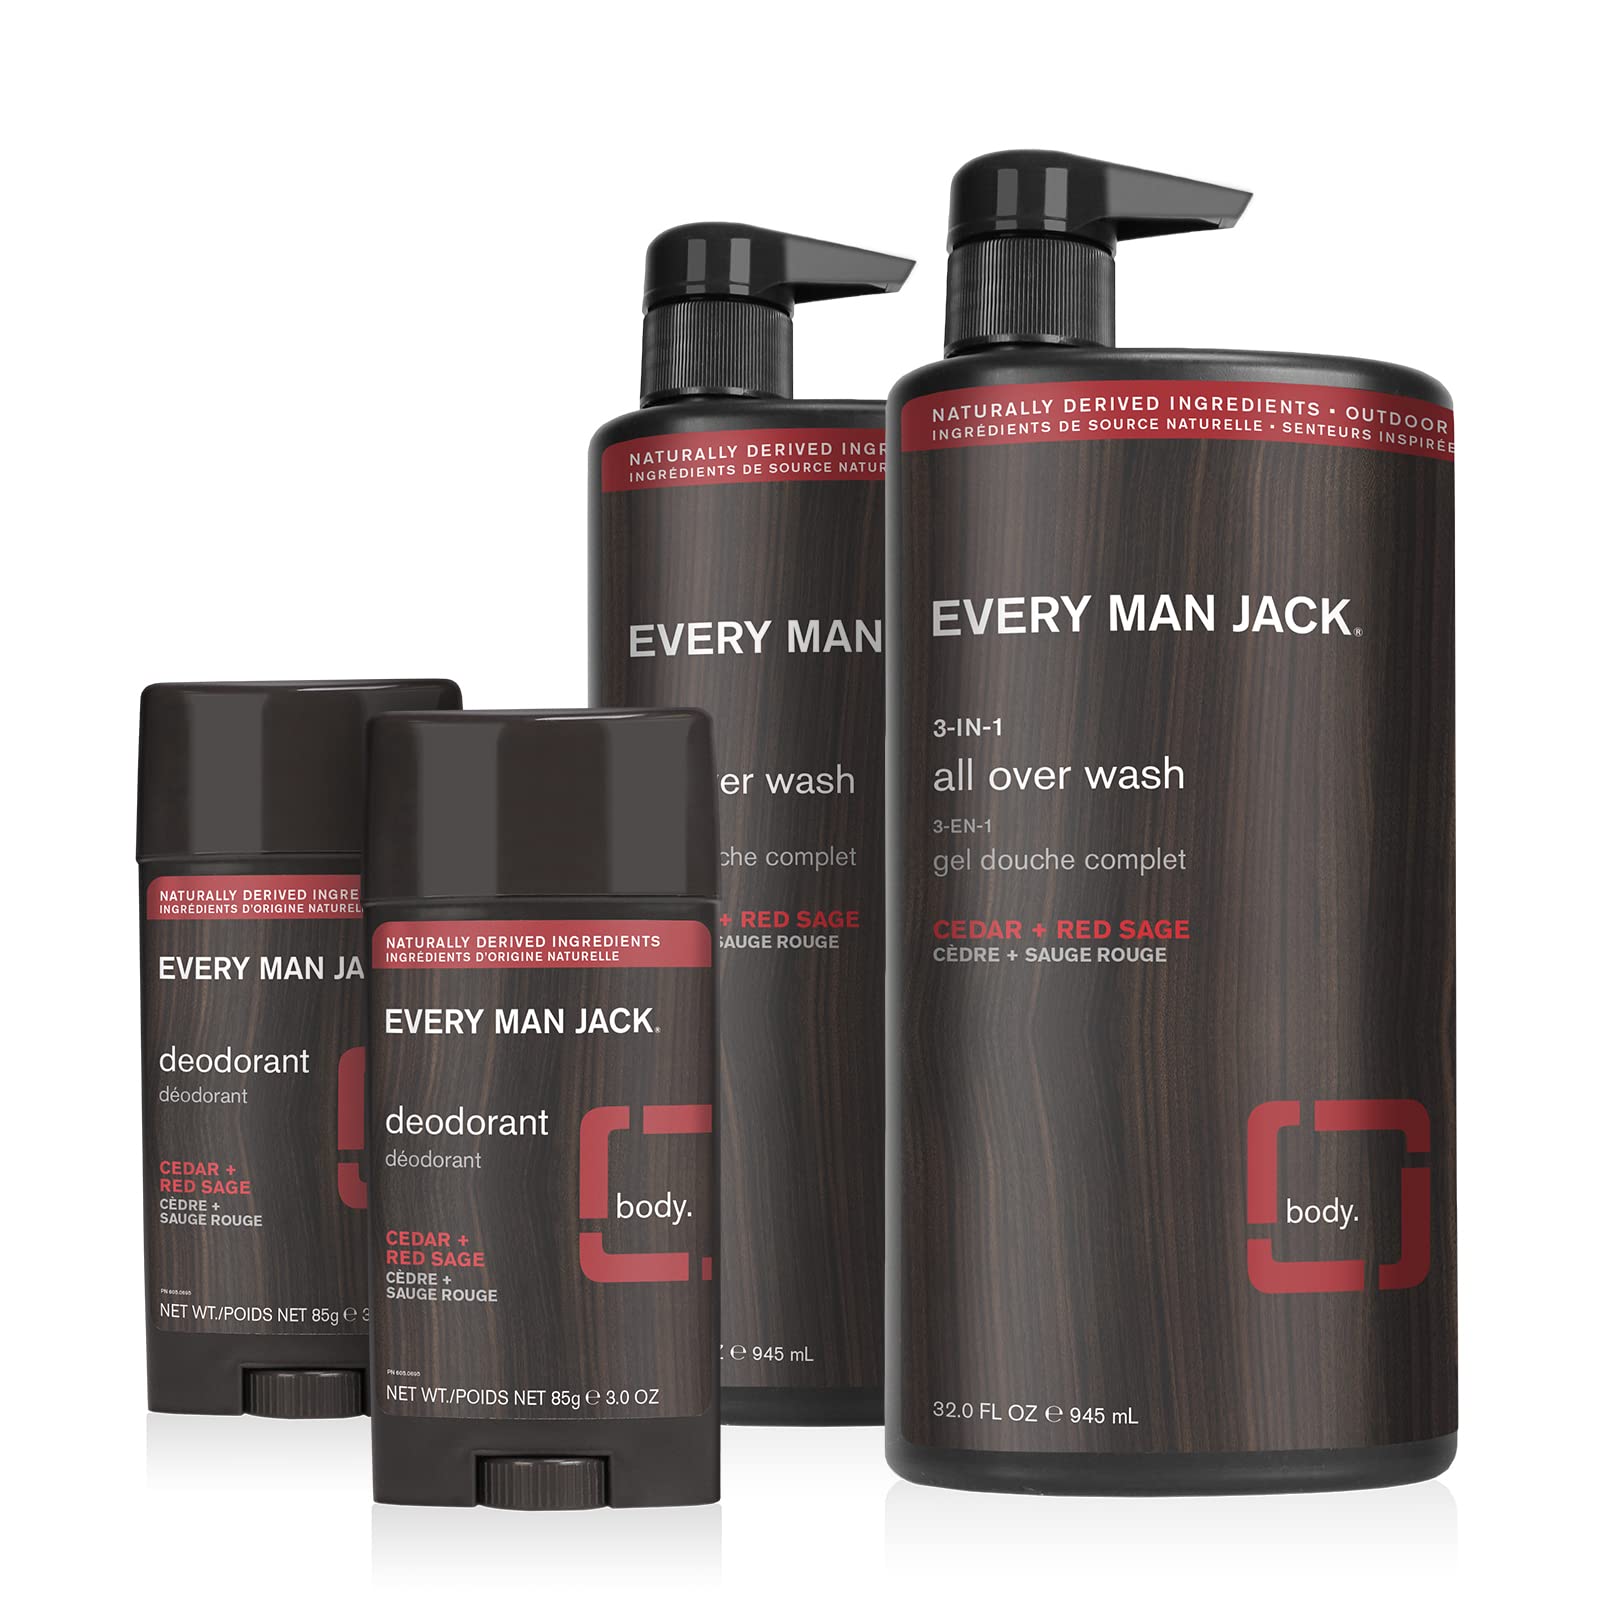 Every Man Jack Men’s All Over Wash + Deodorant Set - Cleanse All Skin Types and Fight Odors with Naturally Derived Ingredients and Cedar + Red Sage Scent - All Over Wash Twin Pack + Deo Twin Pack